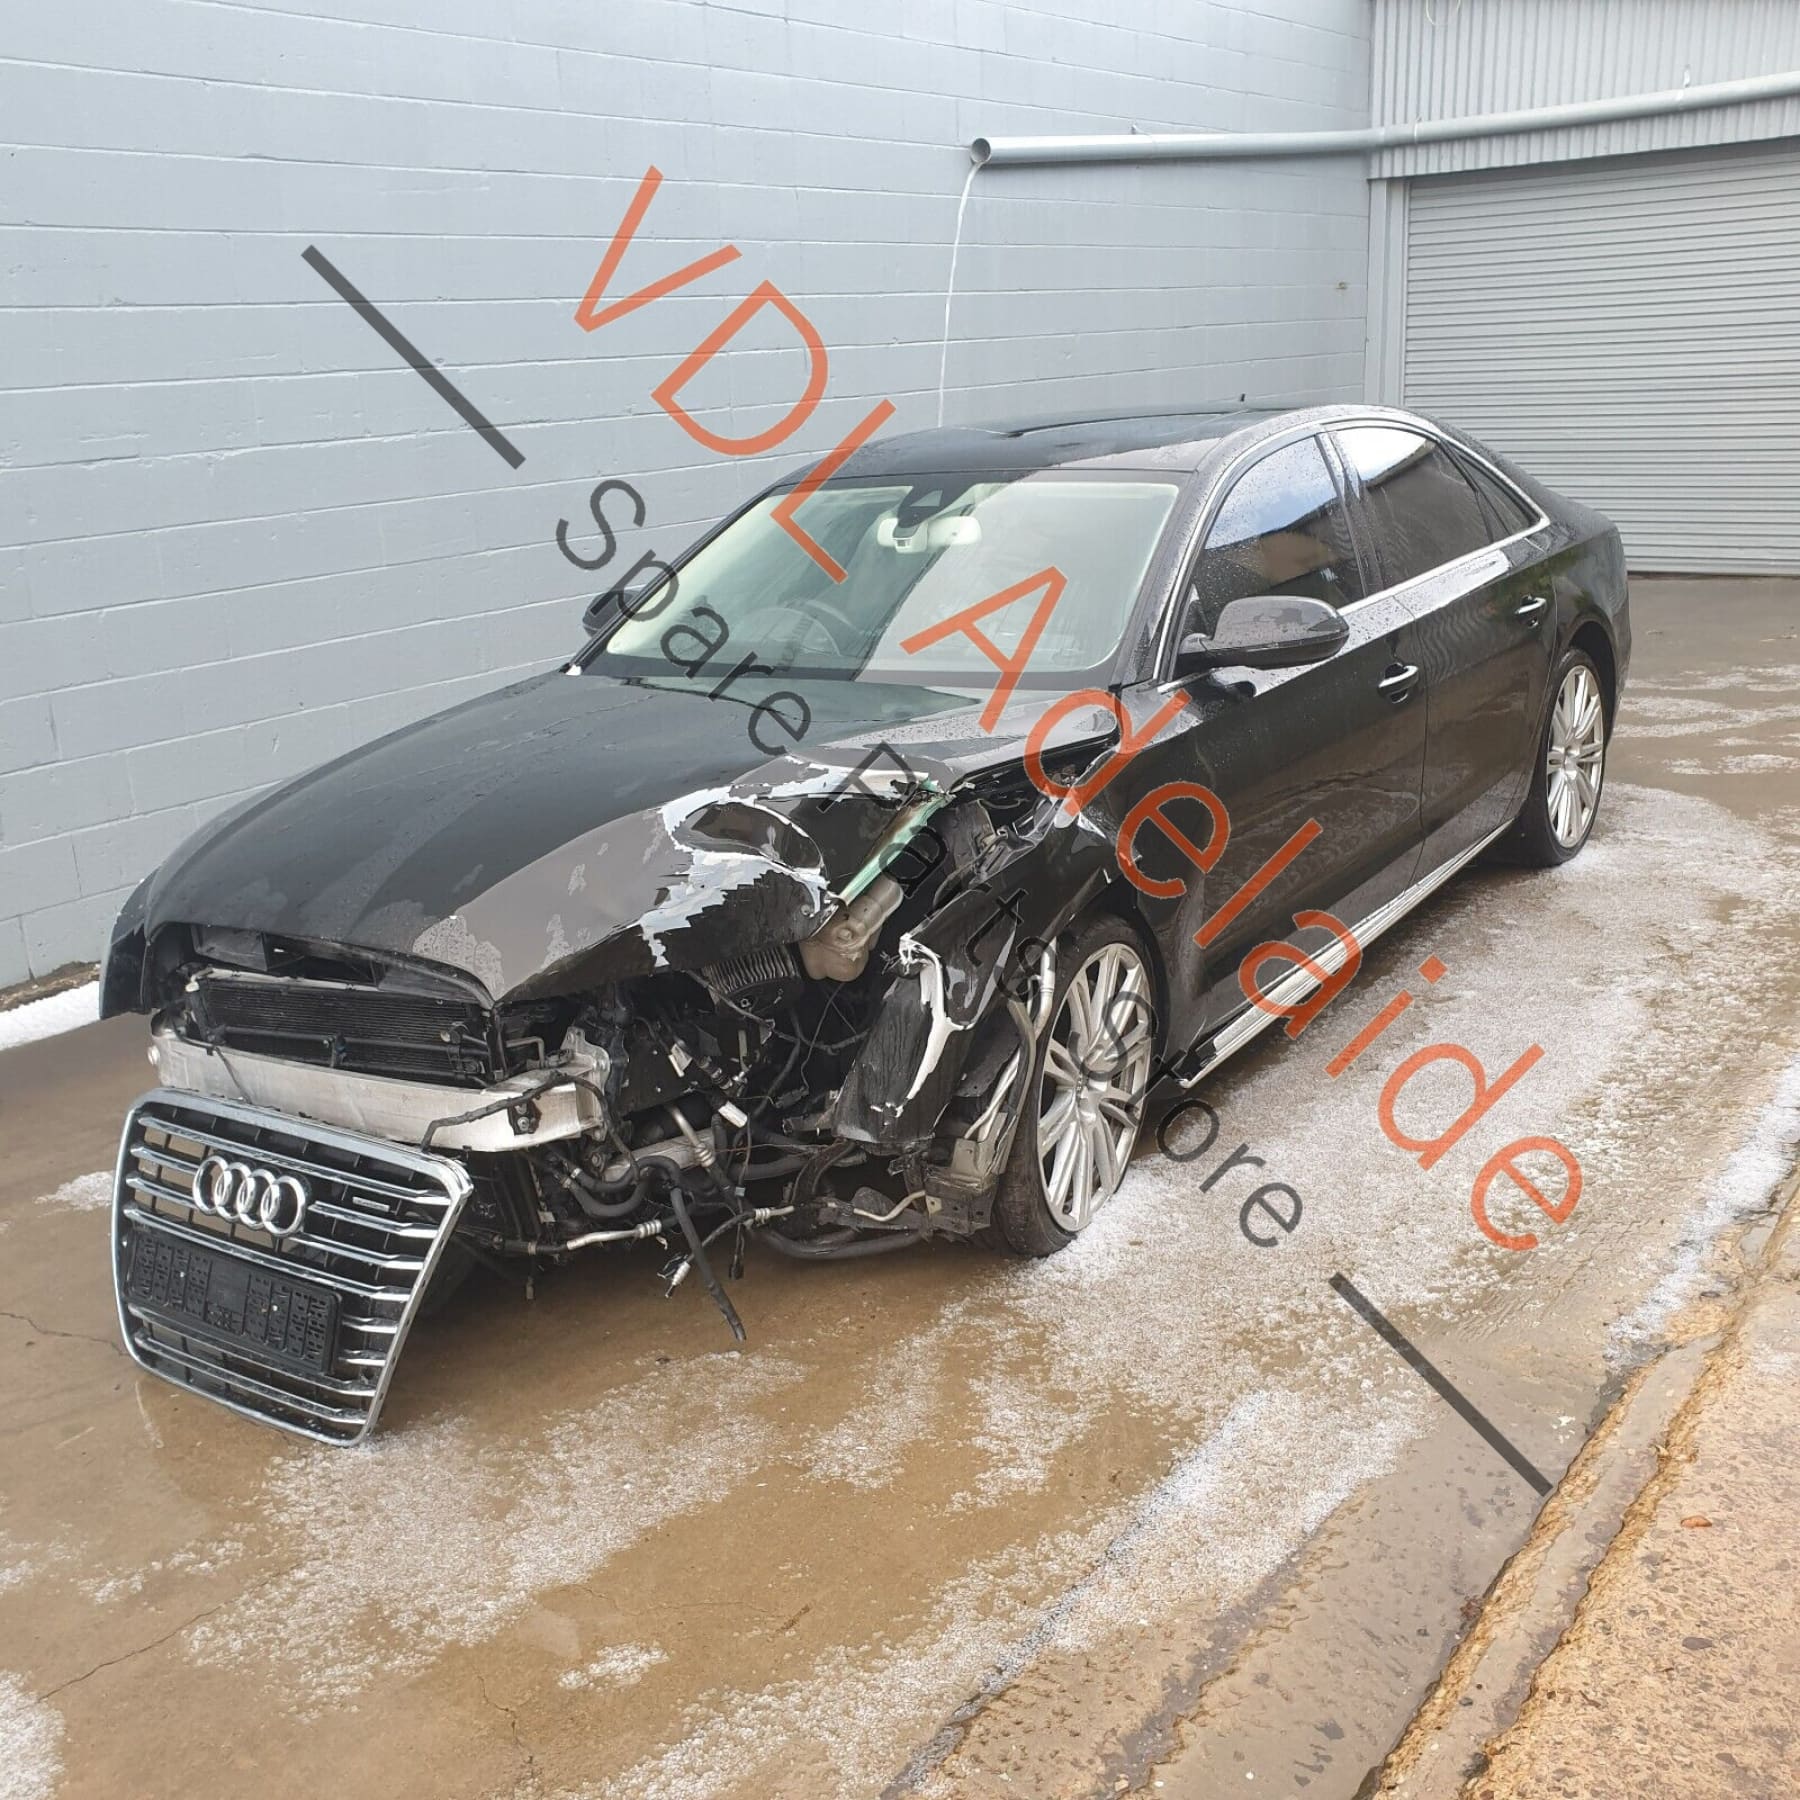 Audi's A8 Sedan Rolls With the Punches to Make T-Bone Crashes